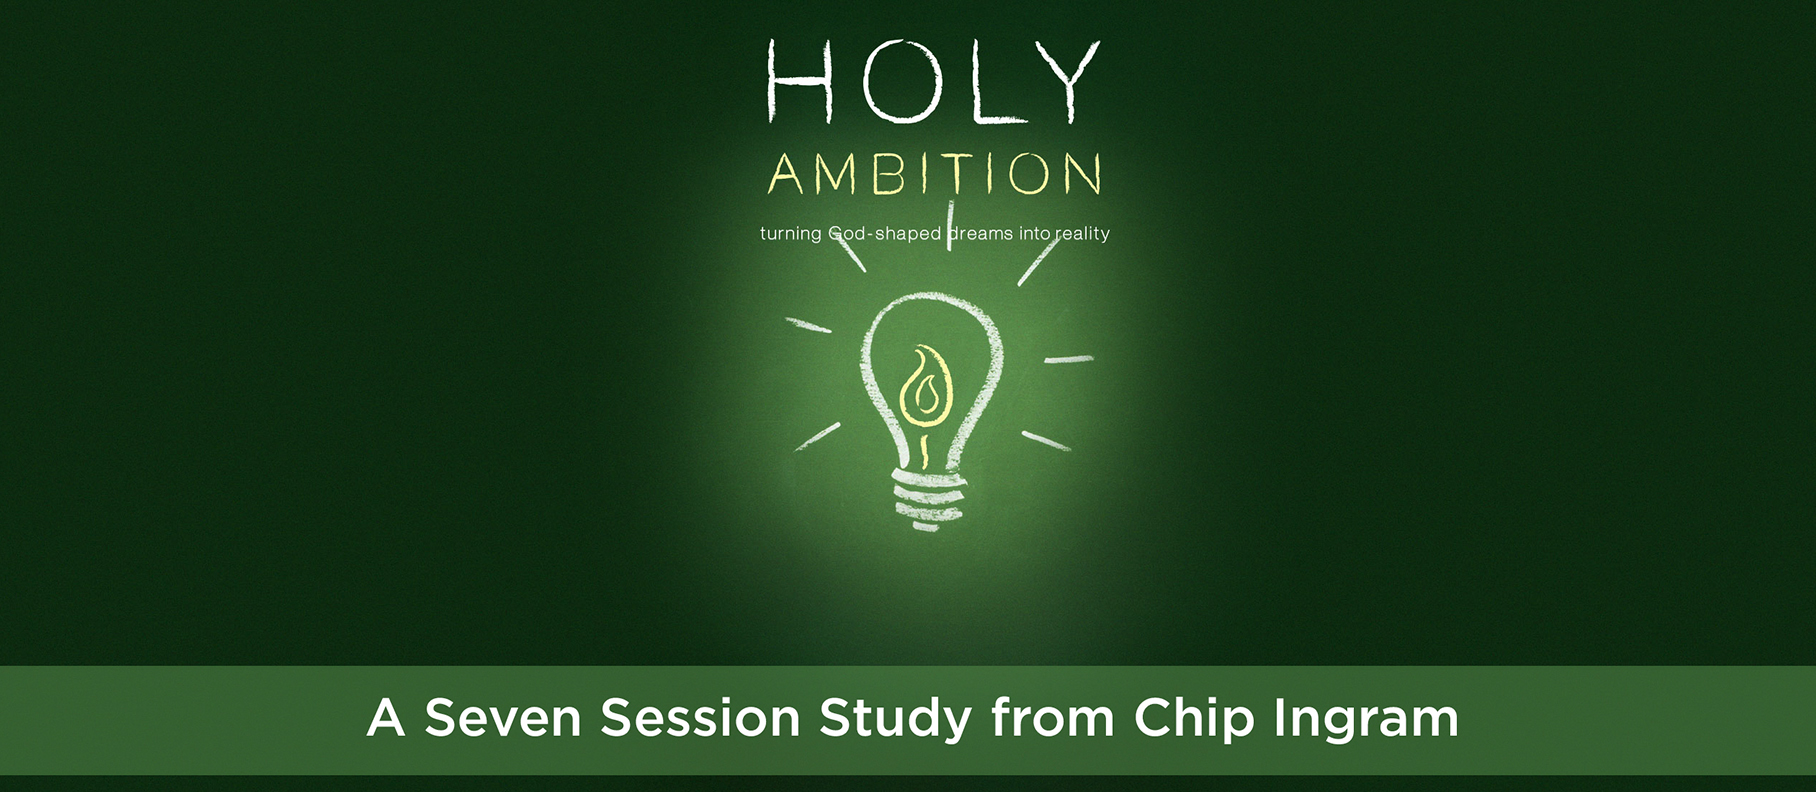 Holy Ambition: Turning God-Shaped Dreams Into Reality